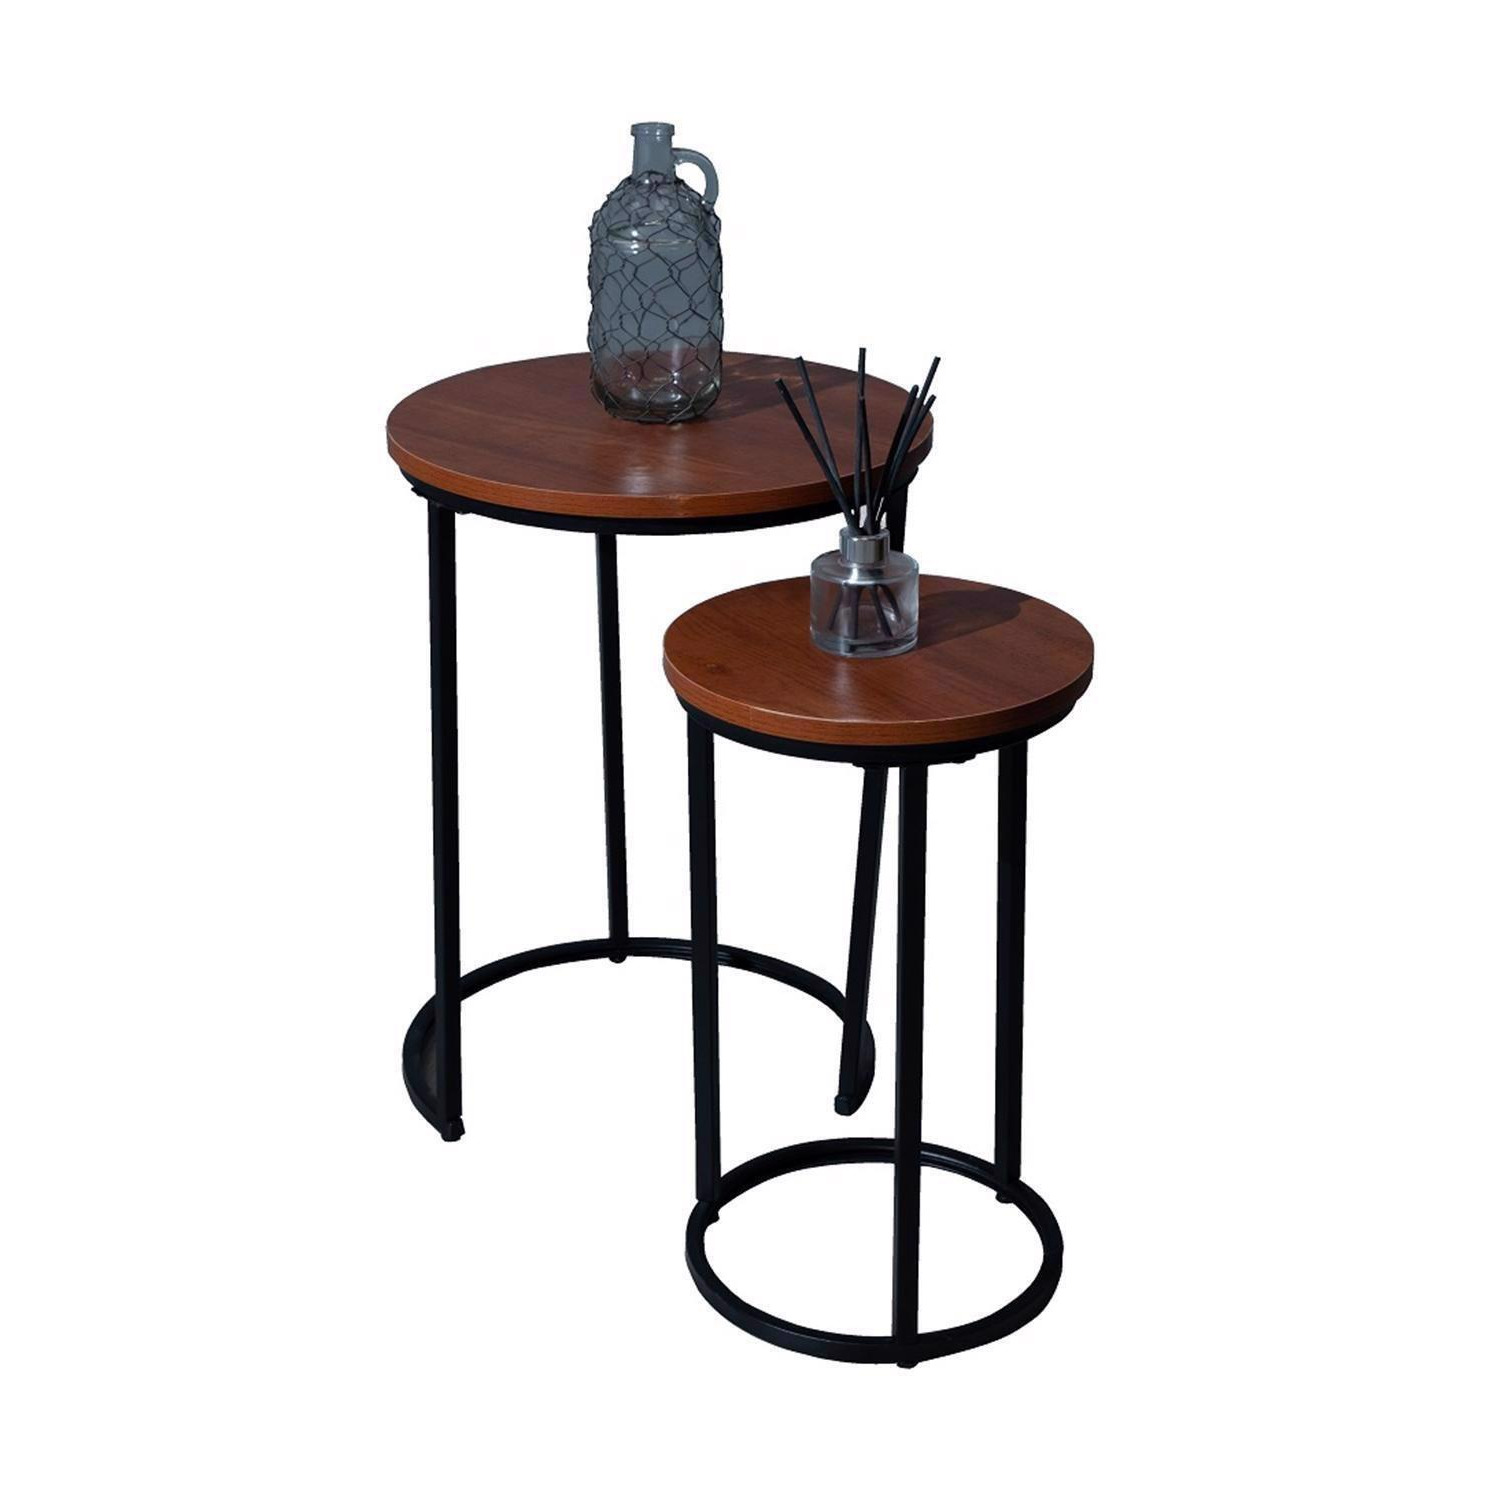 Industrial Inspired Walnut Effect Nest Of 2 Tables - image 1